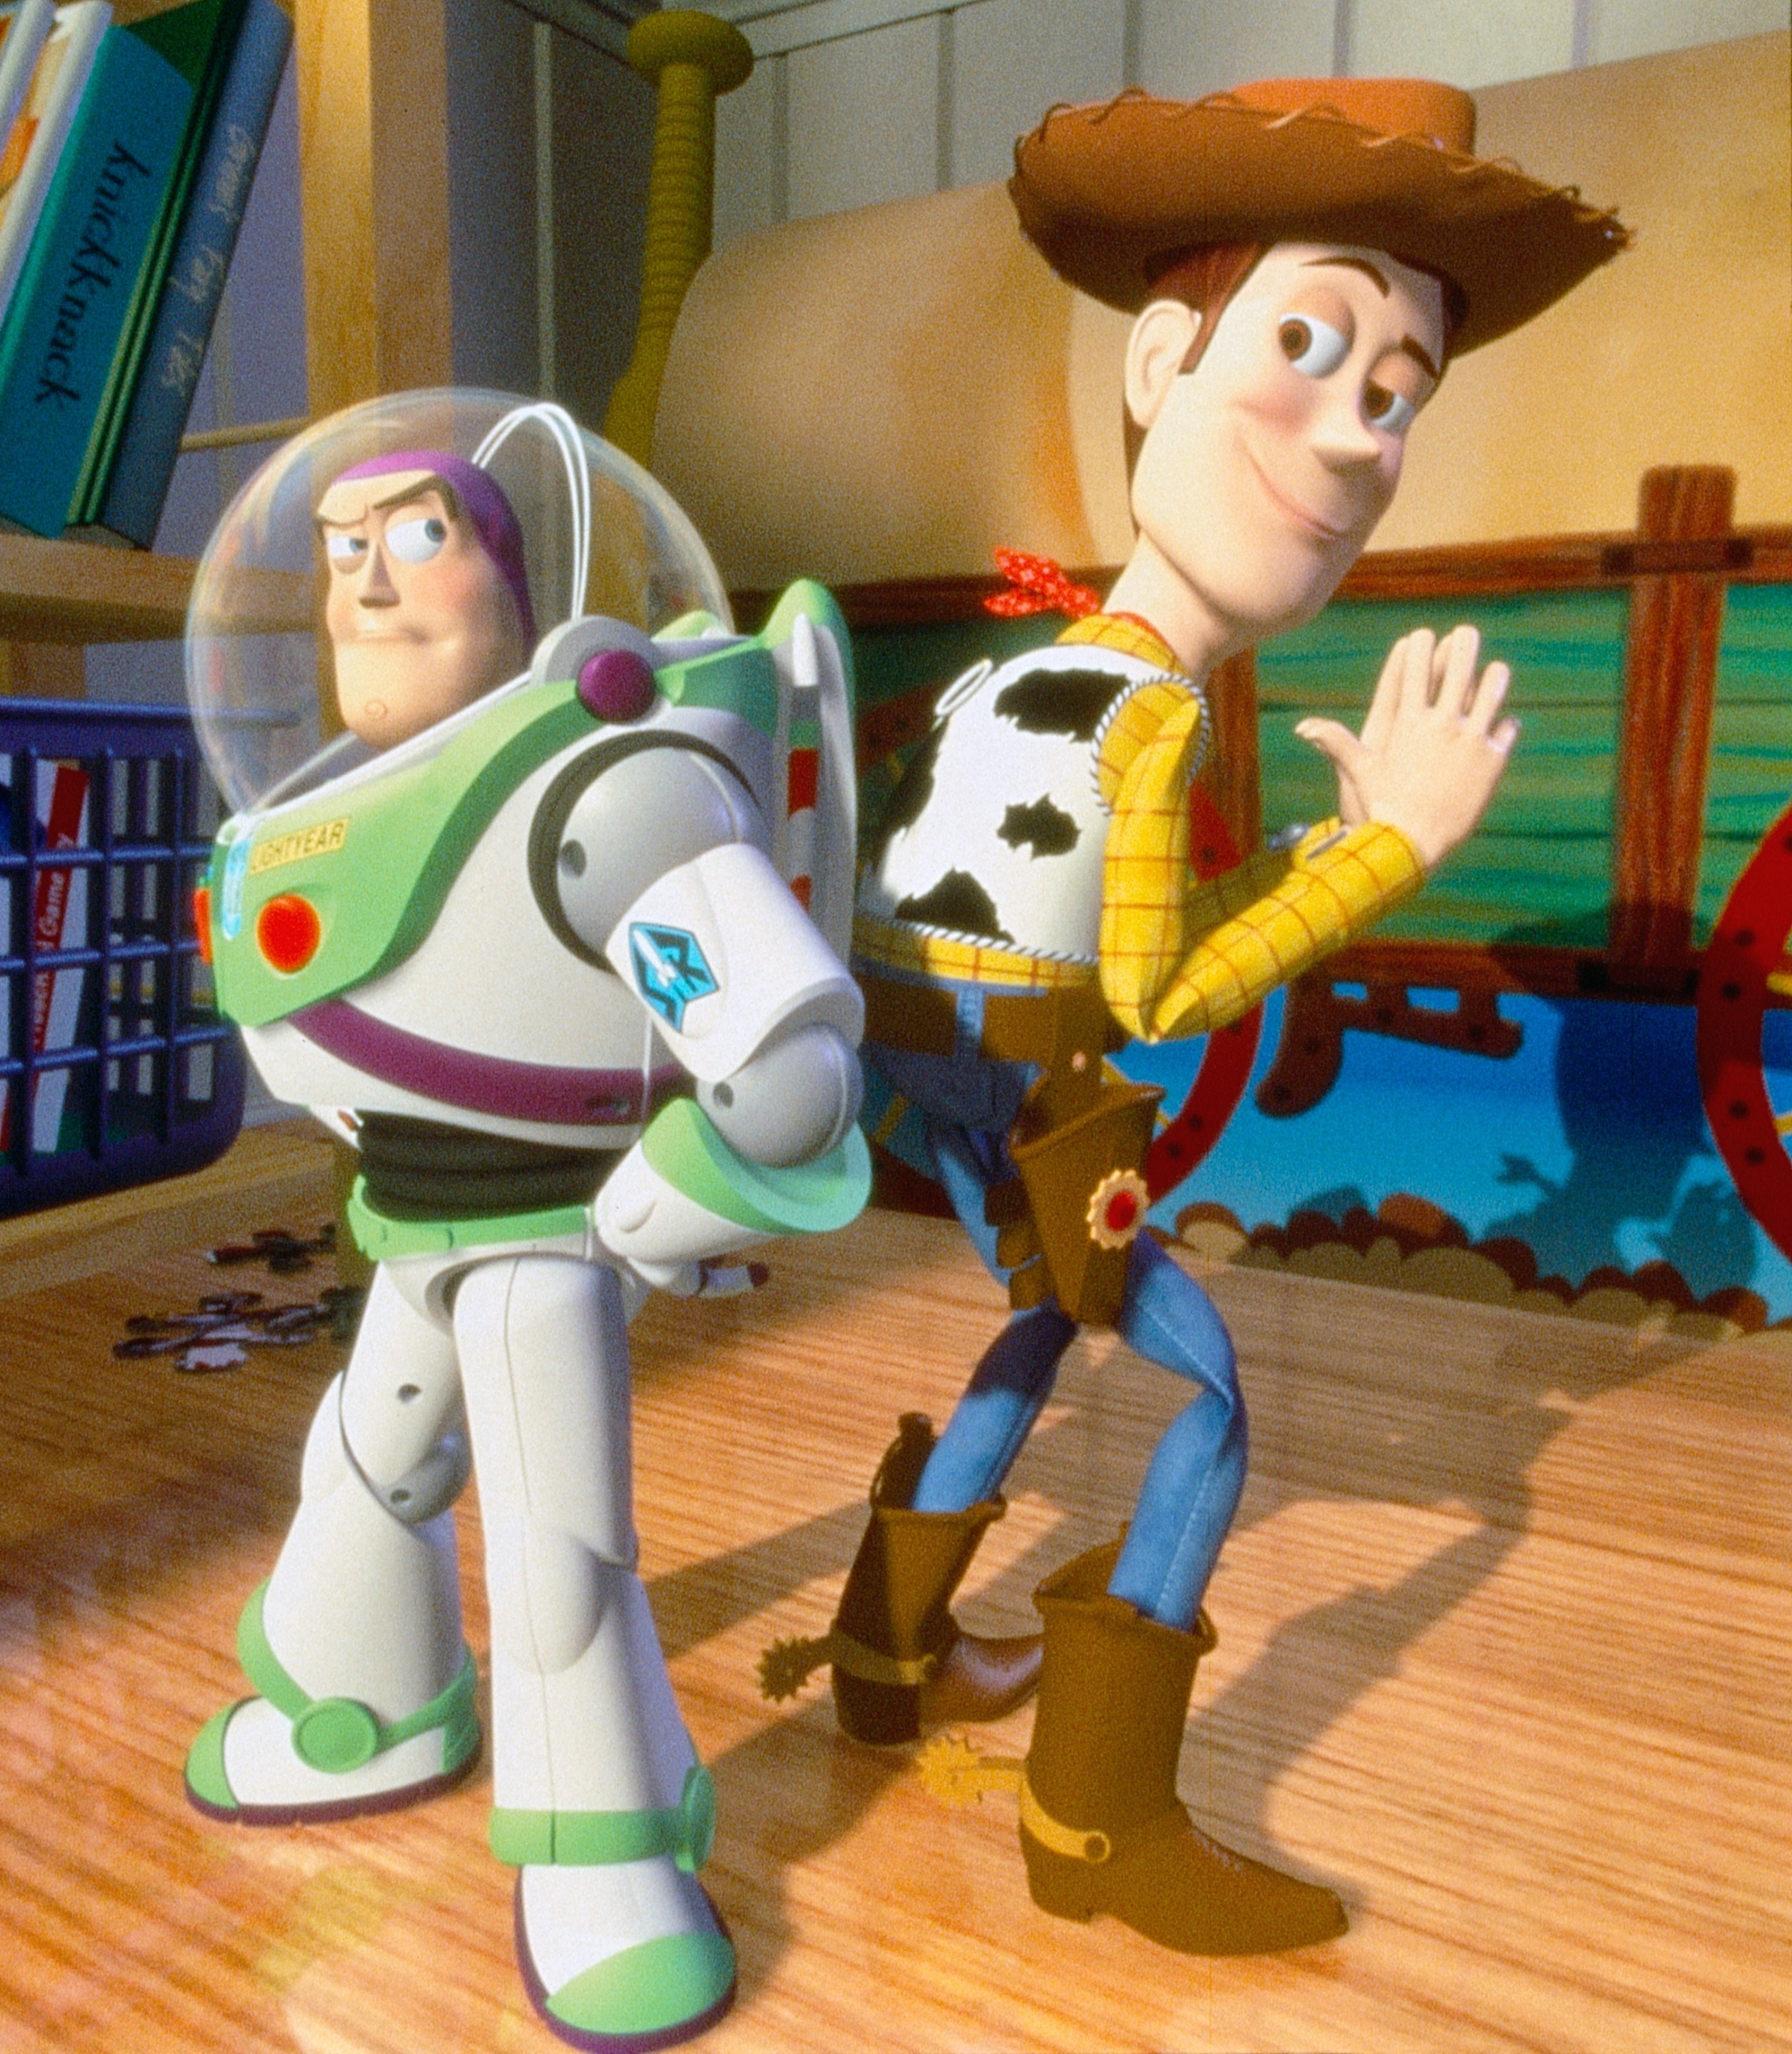 Animated astronaut and cowboy